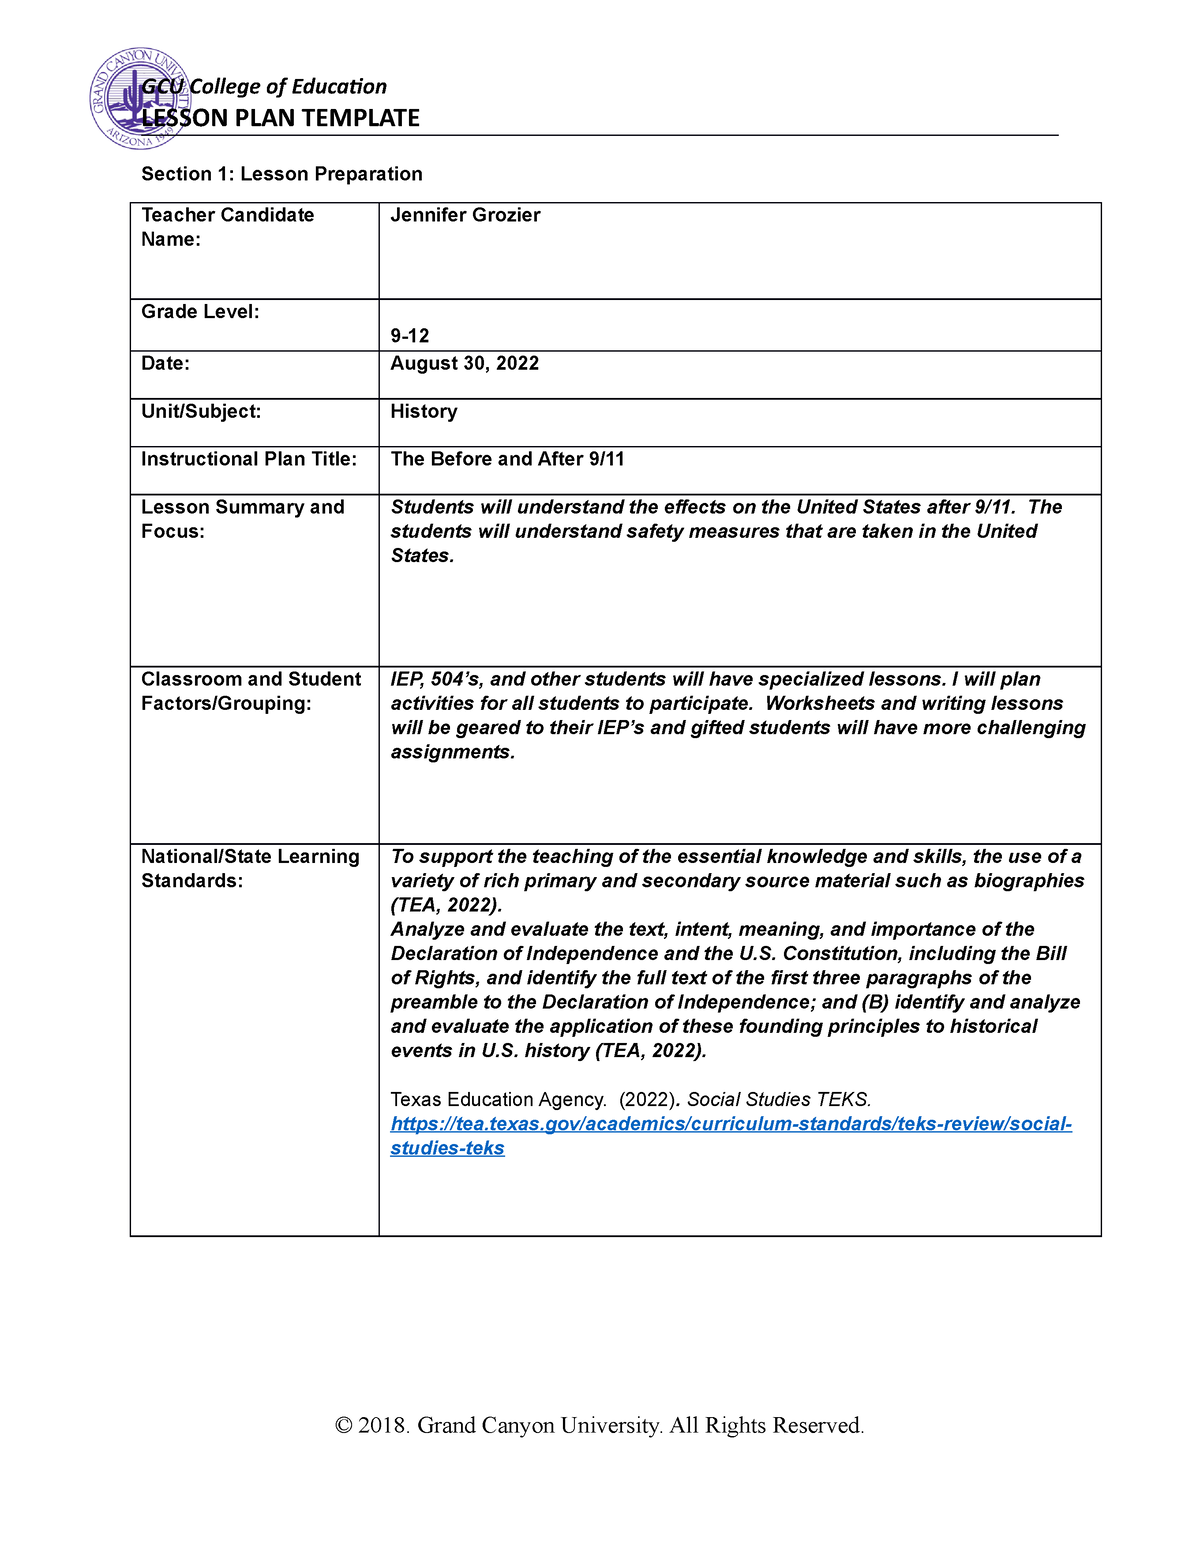 coe-lesson-plan-template-lesson-plan-template-section-1-lesson